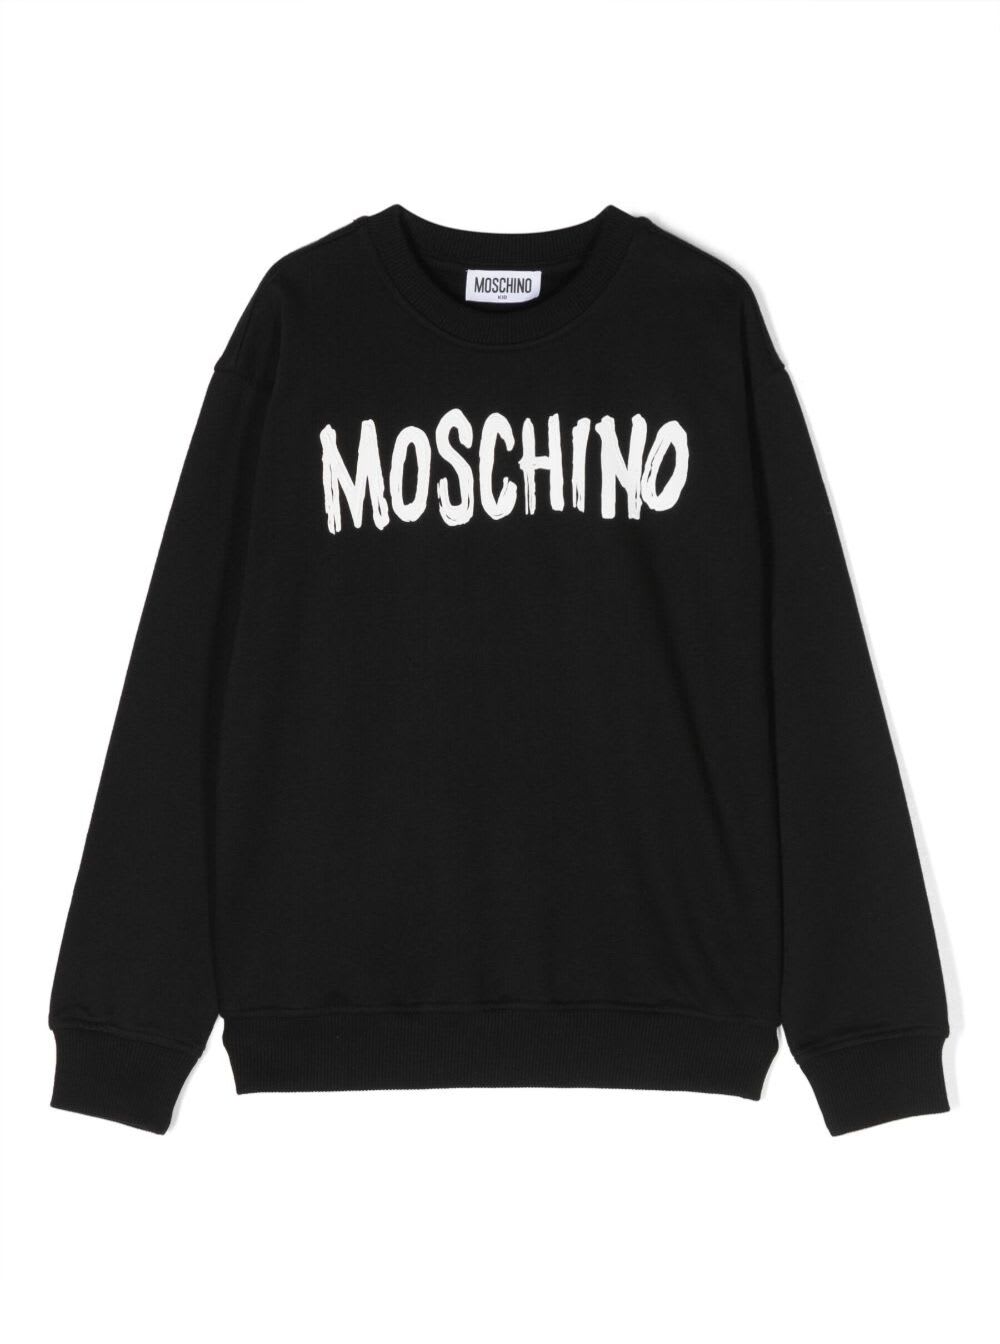 MOSCHINO BLACK SWEATSHIRT WITH LETTERING MAXI LOGO PRINT IN CONTRAST IN COTTON BOY